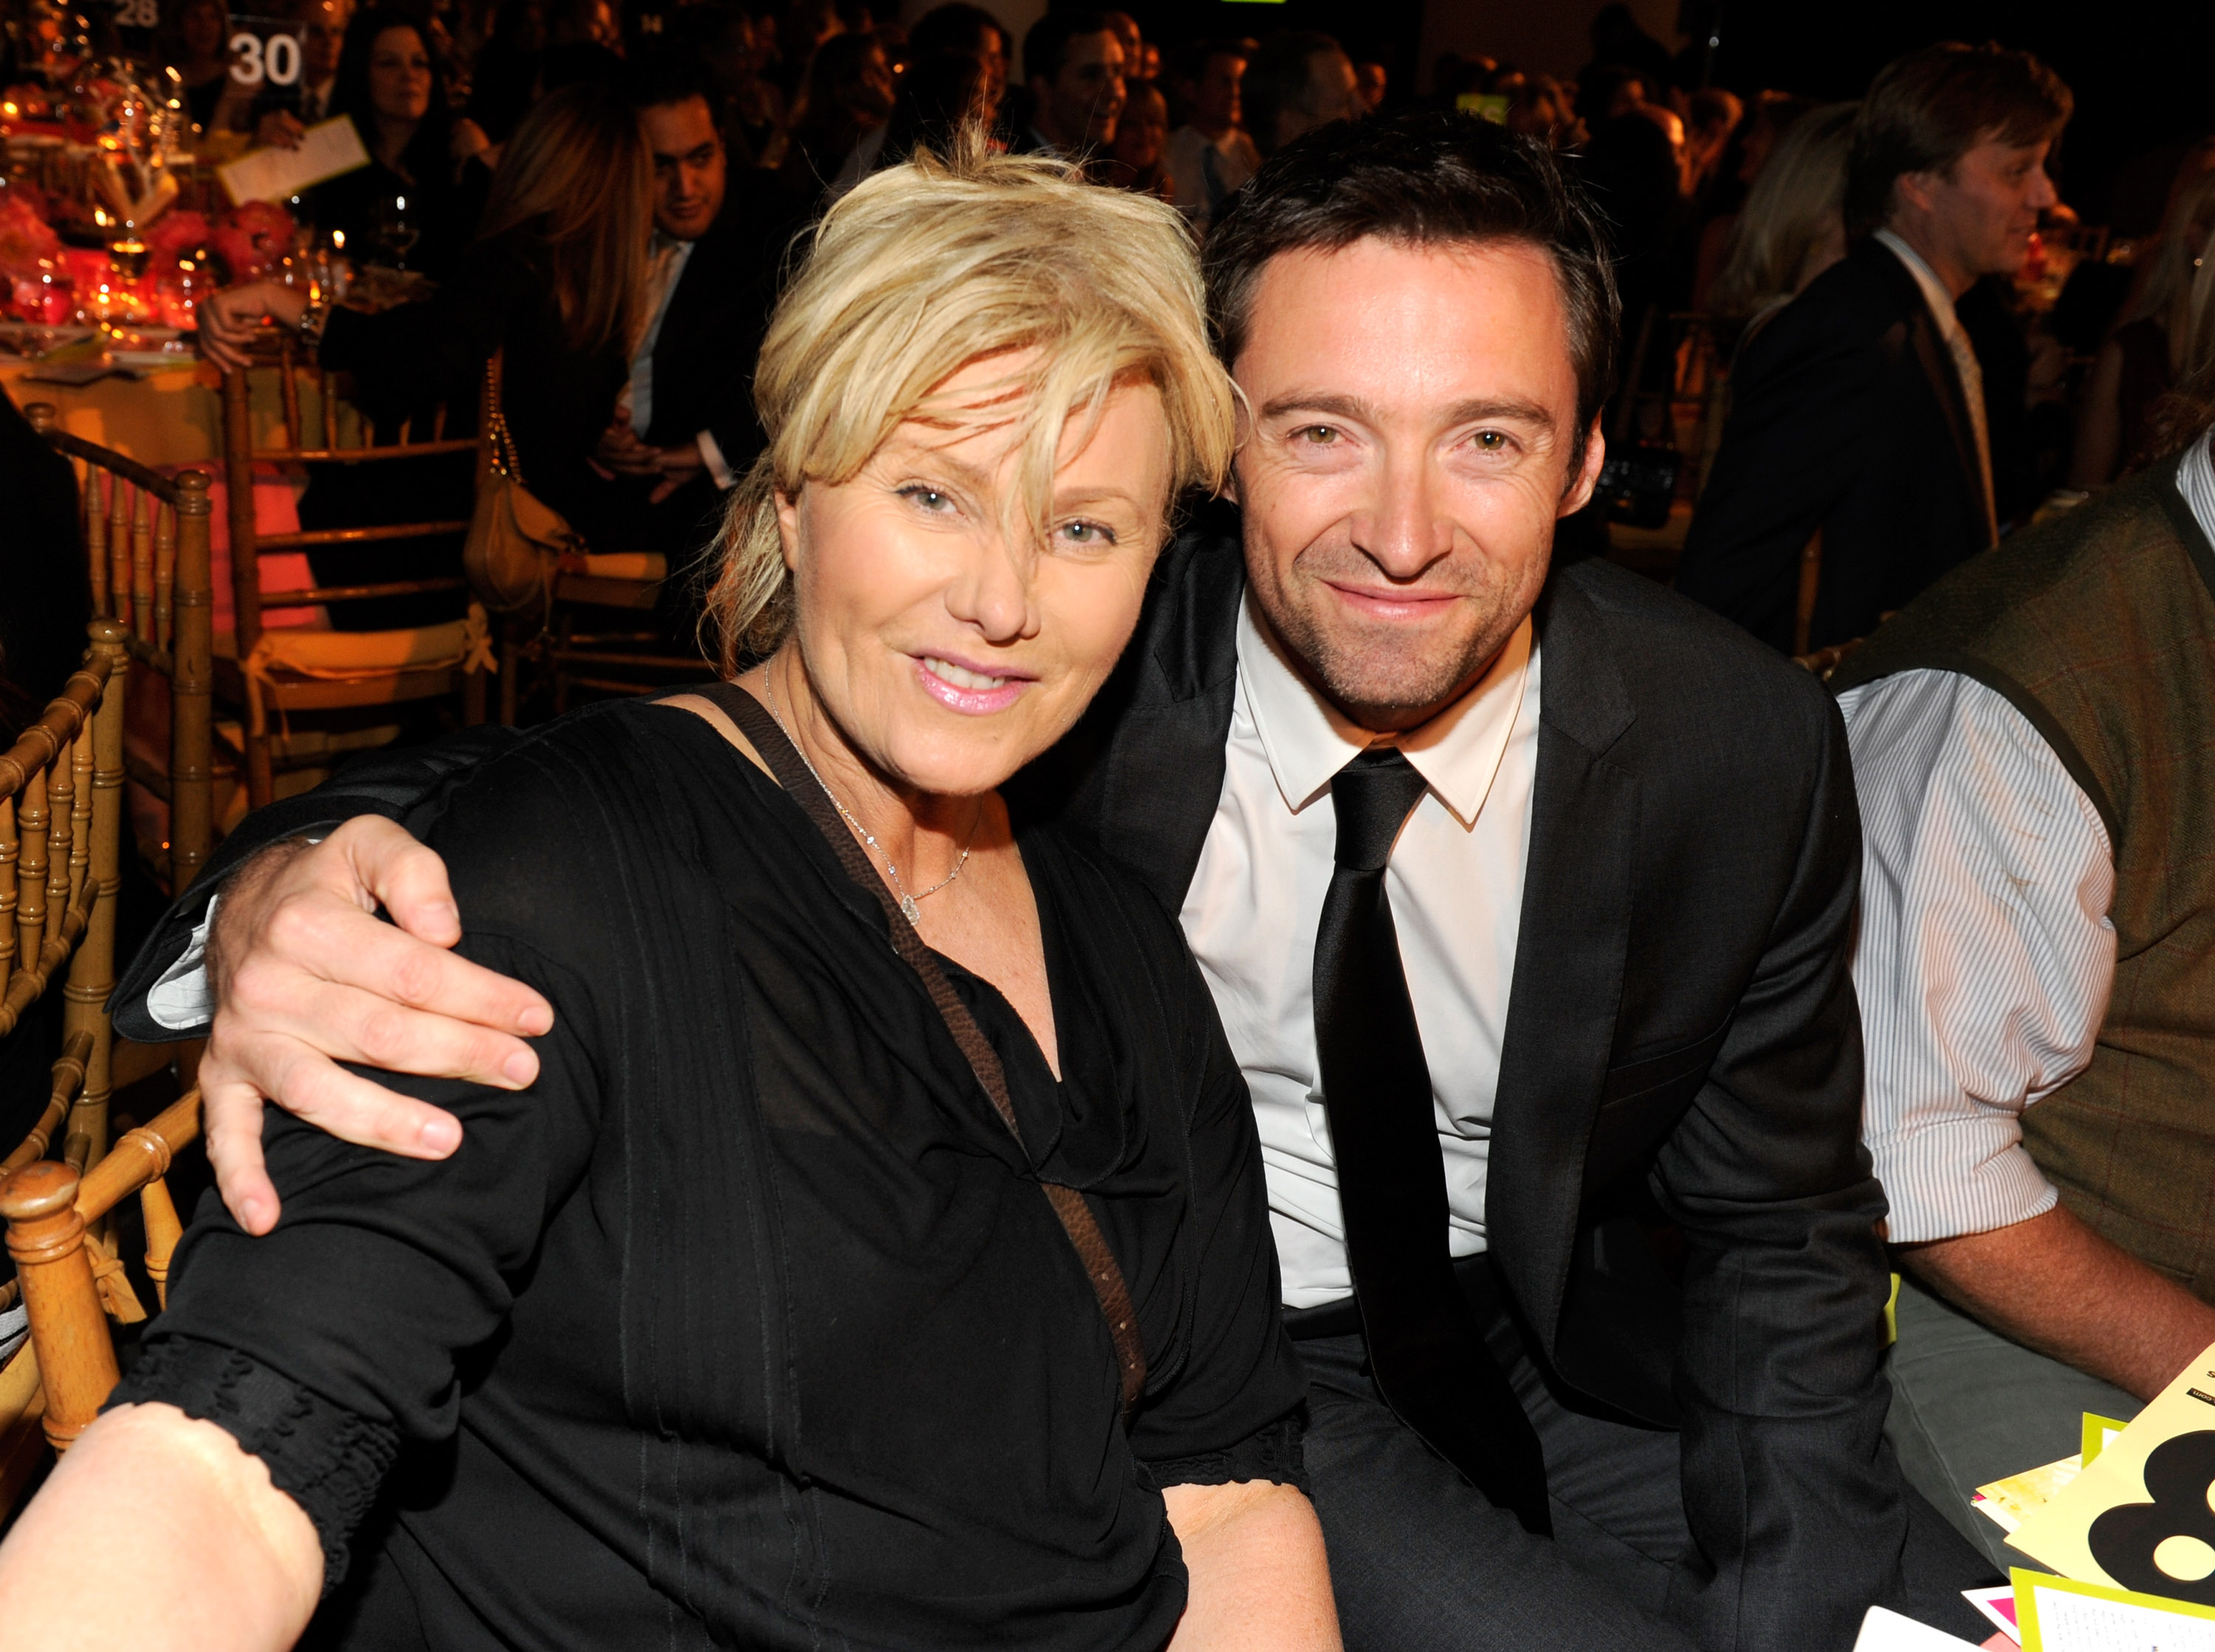 Hugh Jackman and his wife Deborra Furness in New York in 2011 | Source: Getty Images